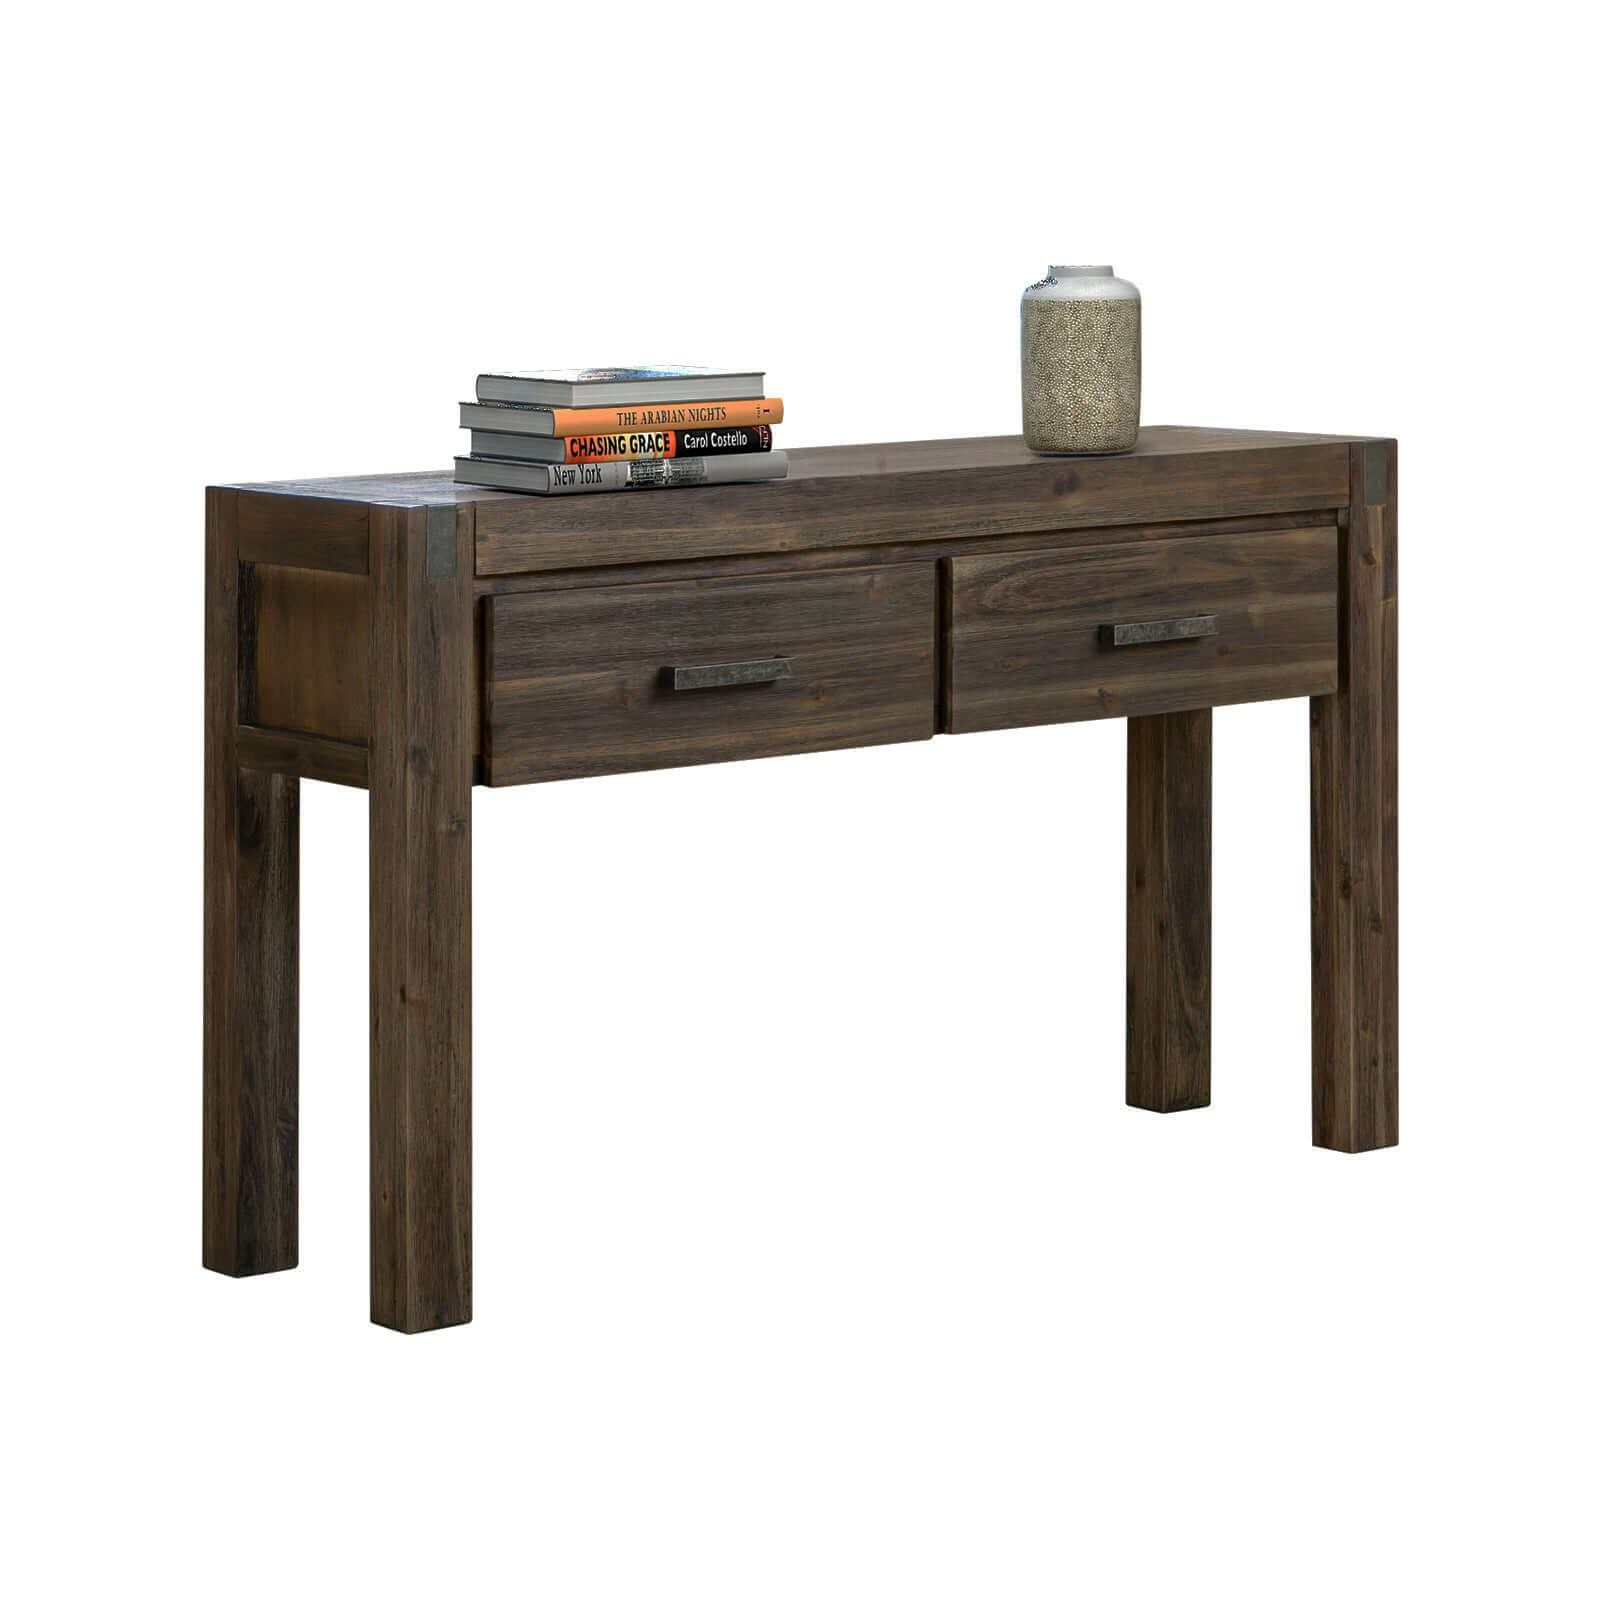 Hall Table 2 Storage Drawers Solid Acacia Wooden Frame Hallway in Chocolate Color-Upinteriors